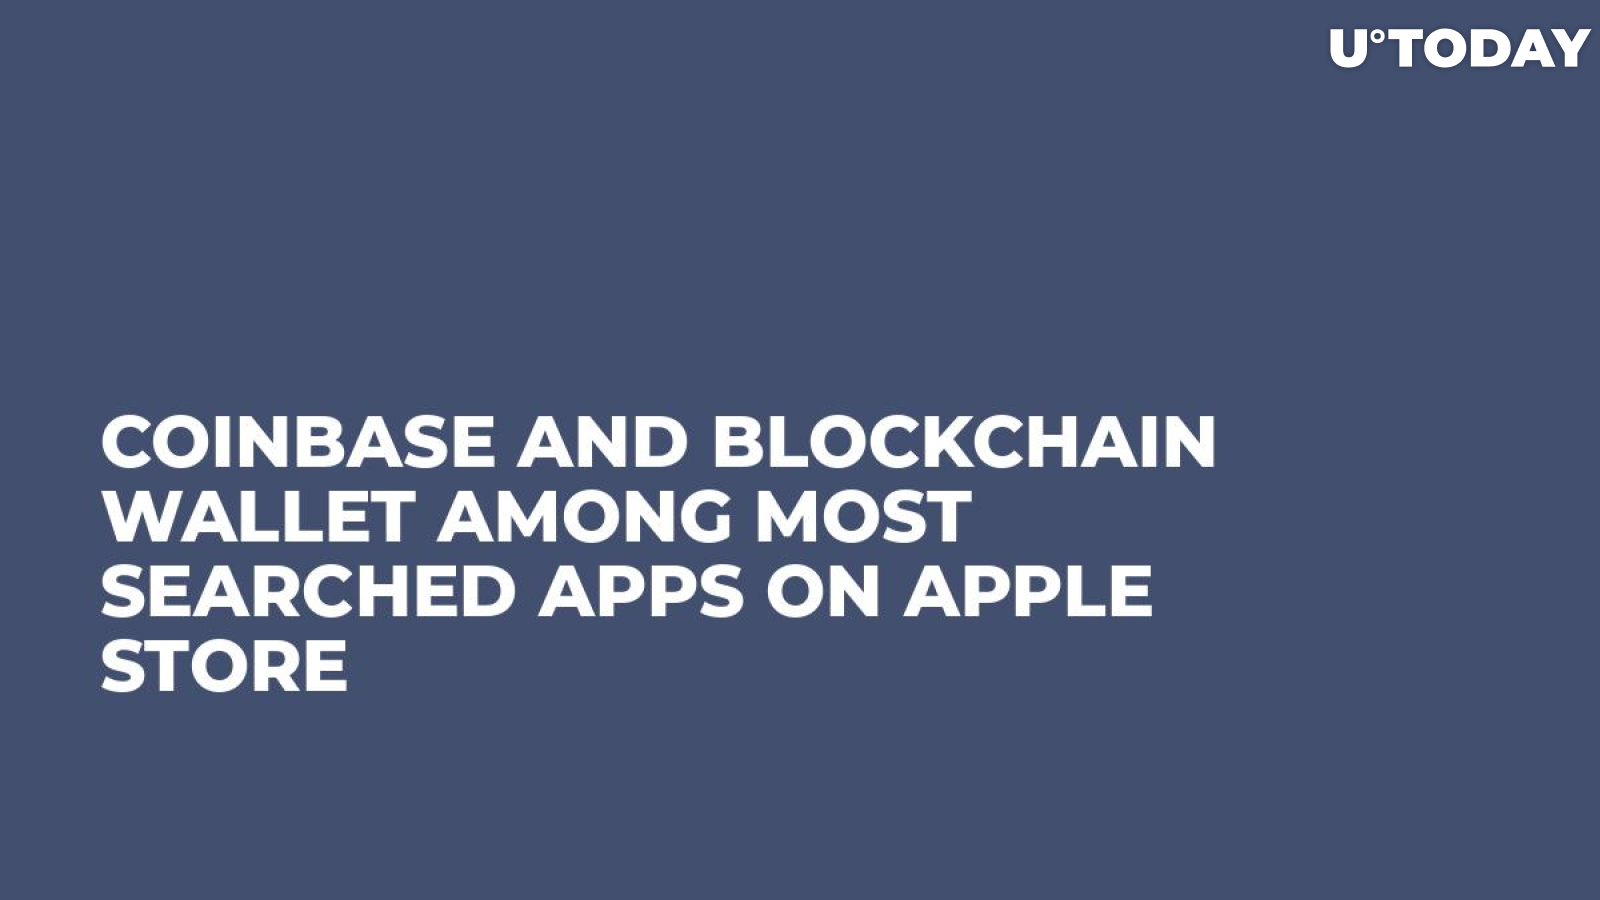 Coinbase and Blockchain Wallet Among Most Searched Apps on Apple Store